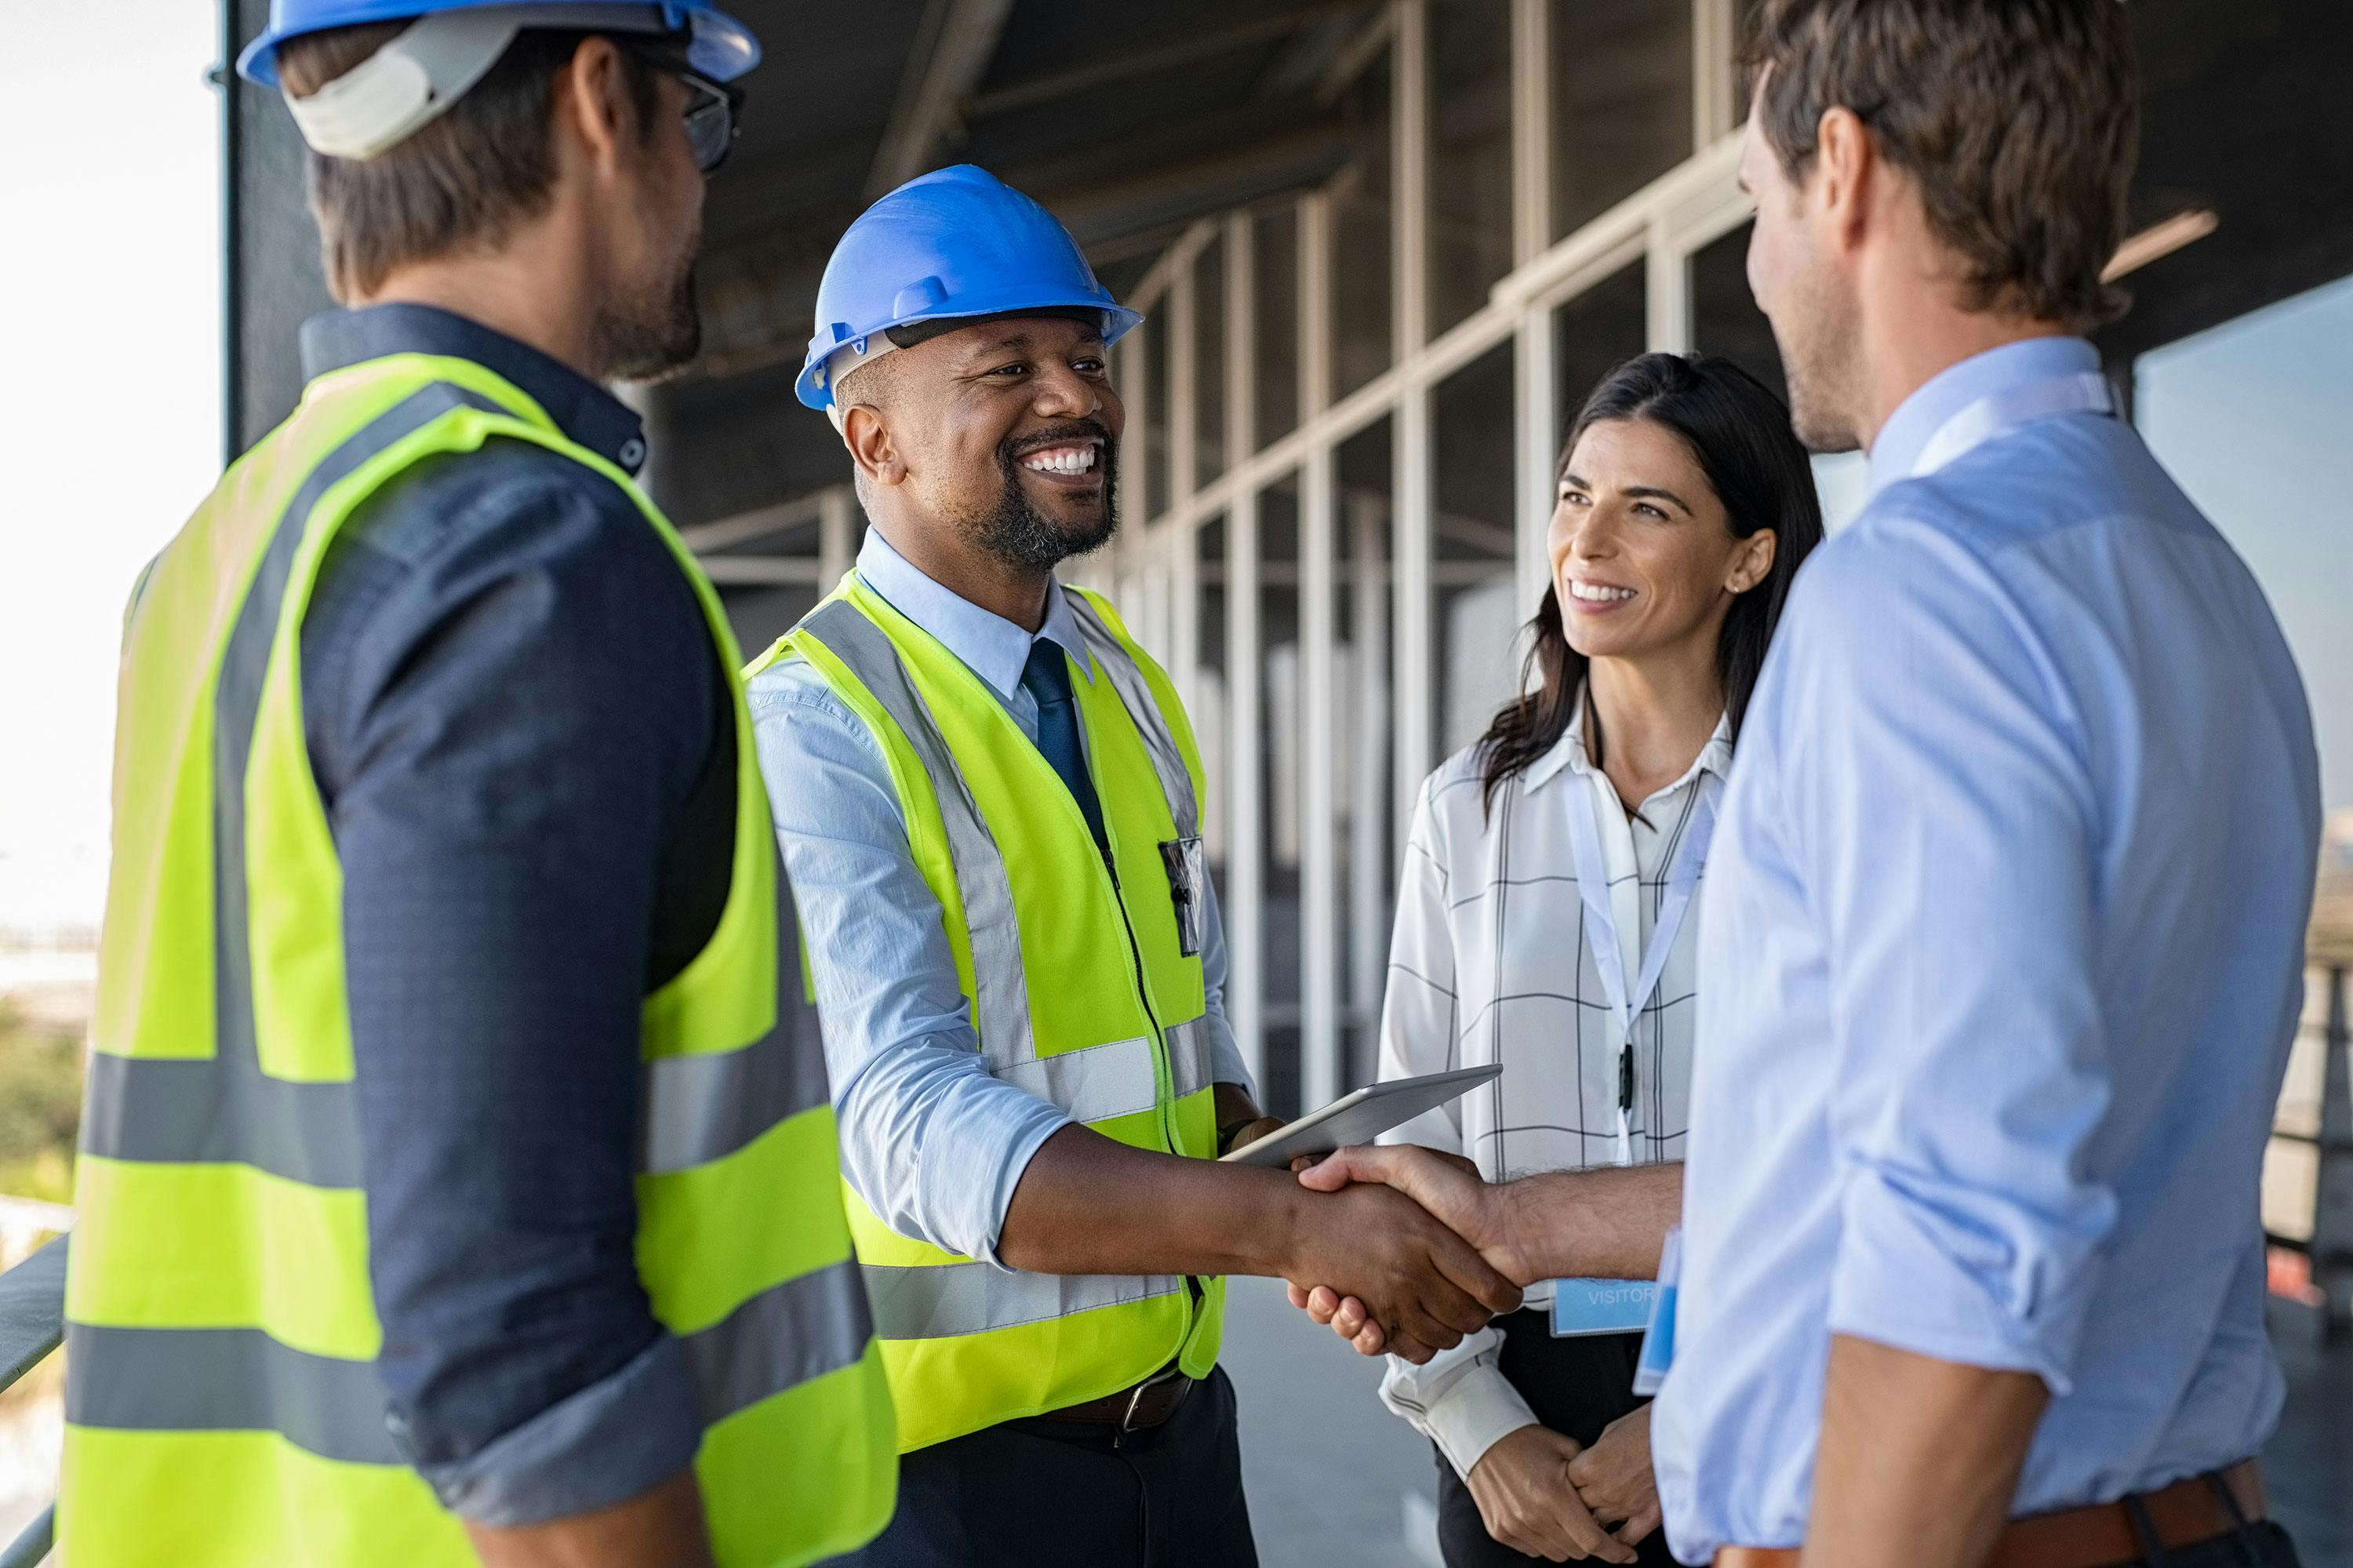 improved workplace safety with hearing insurance represented by construction workers shaking hands